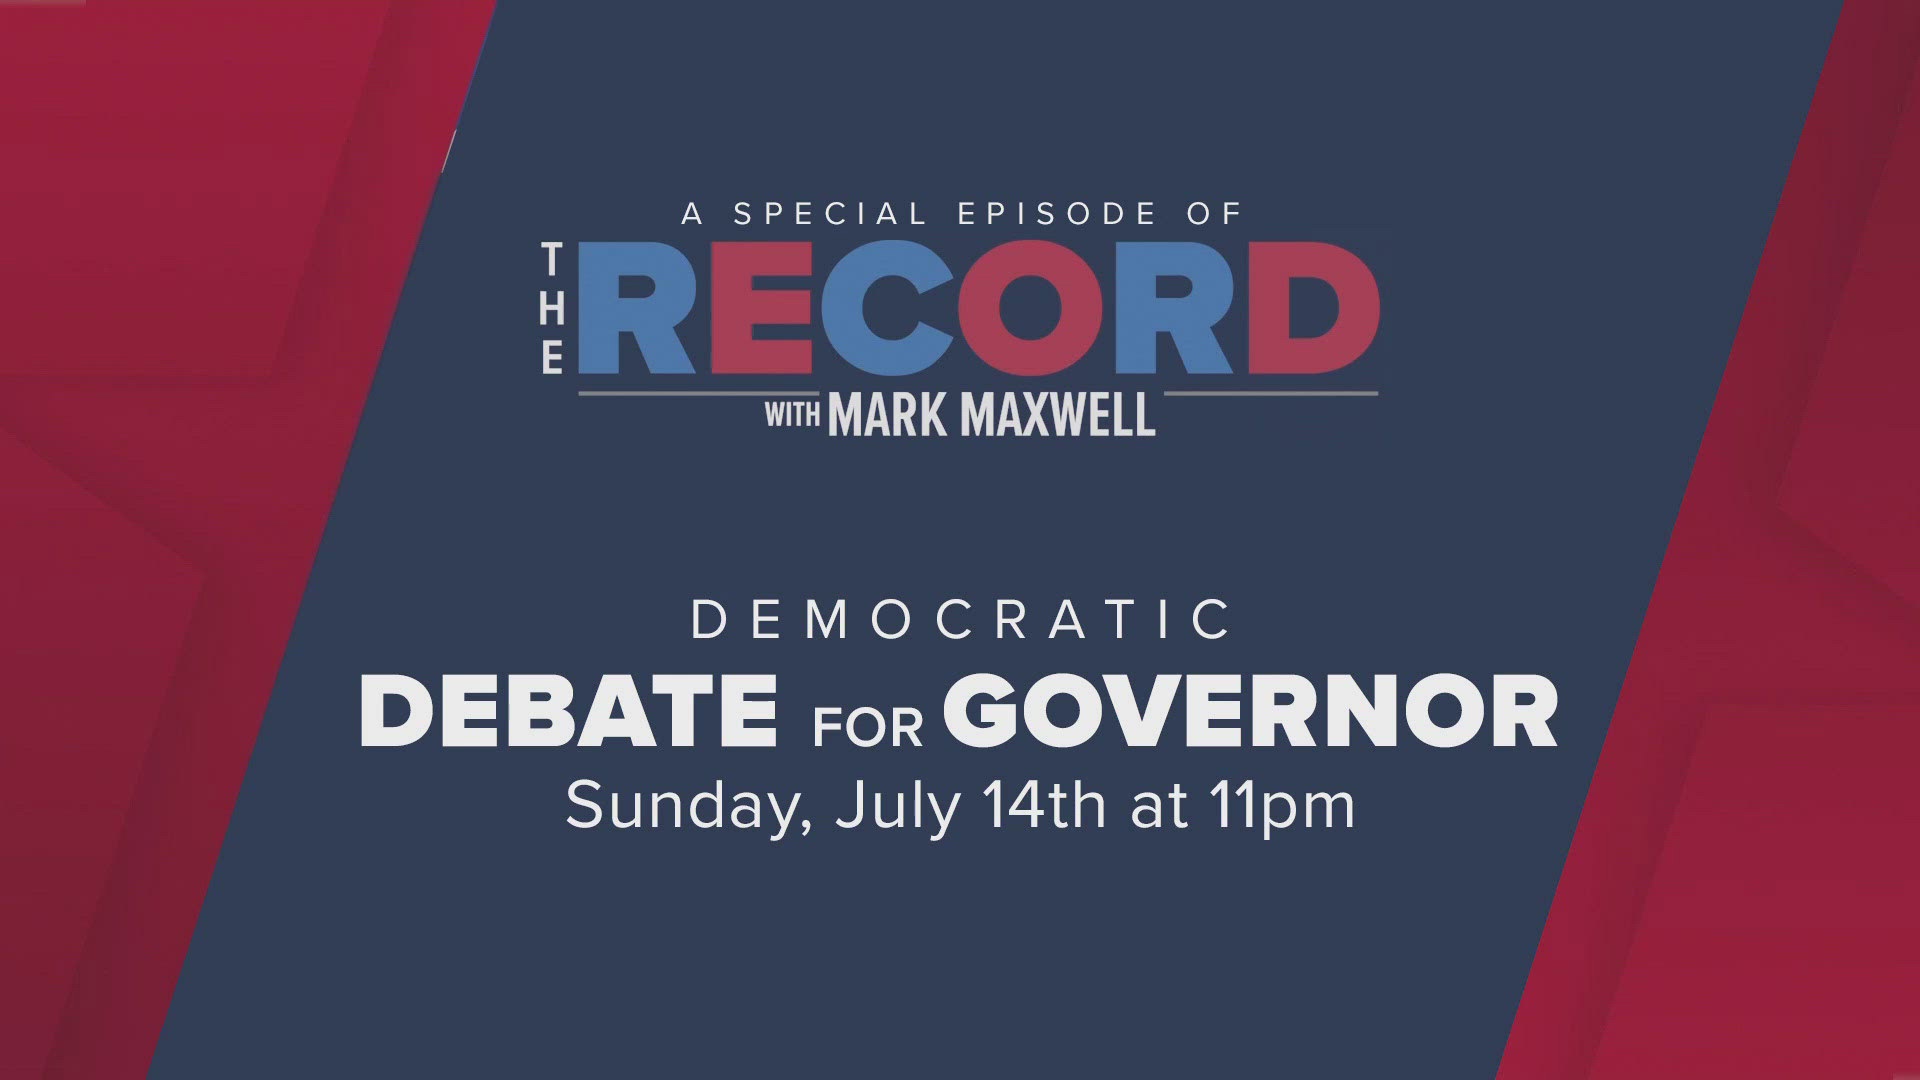 The debate between House Minority Leader Crystal Quade and businessman Mike Hamra is set to air on Sunday night, July 14.